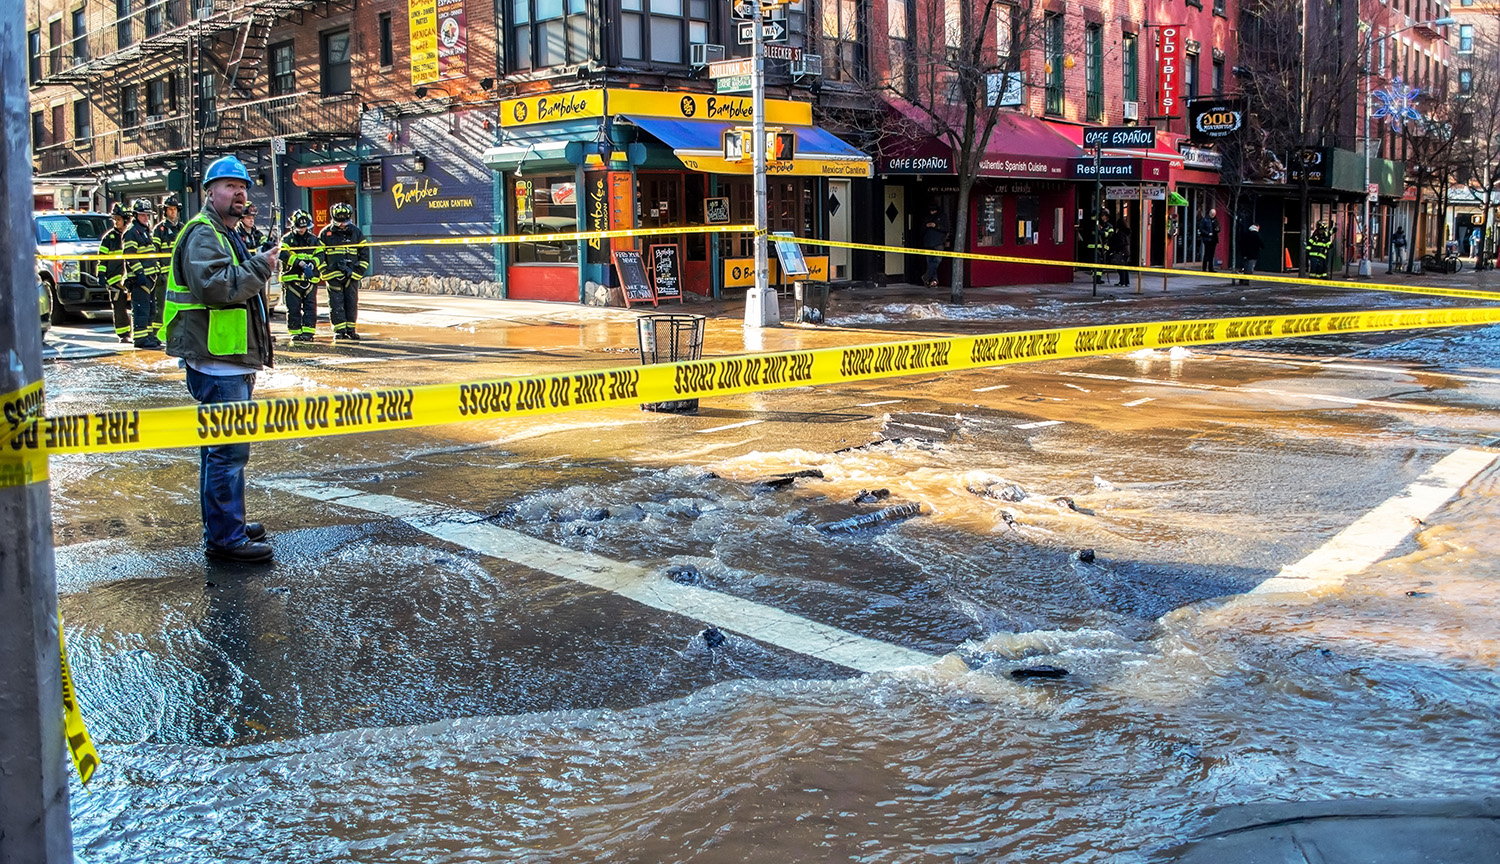 Photo shows a flooded intersection in New York City closed to traffic with yellow caution tape.